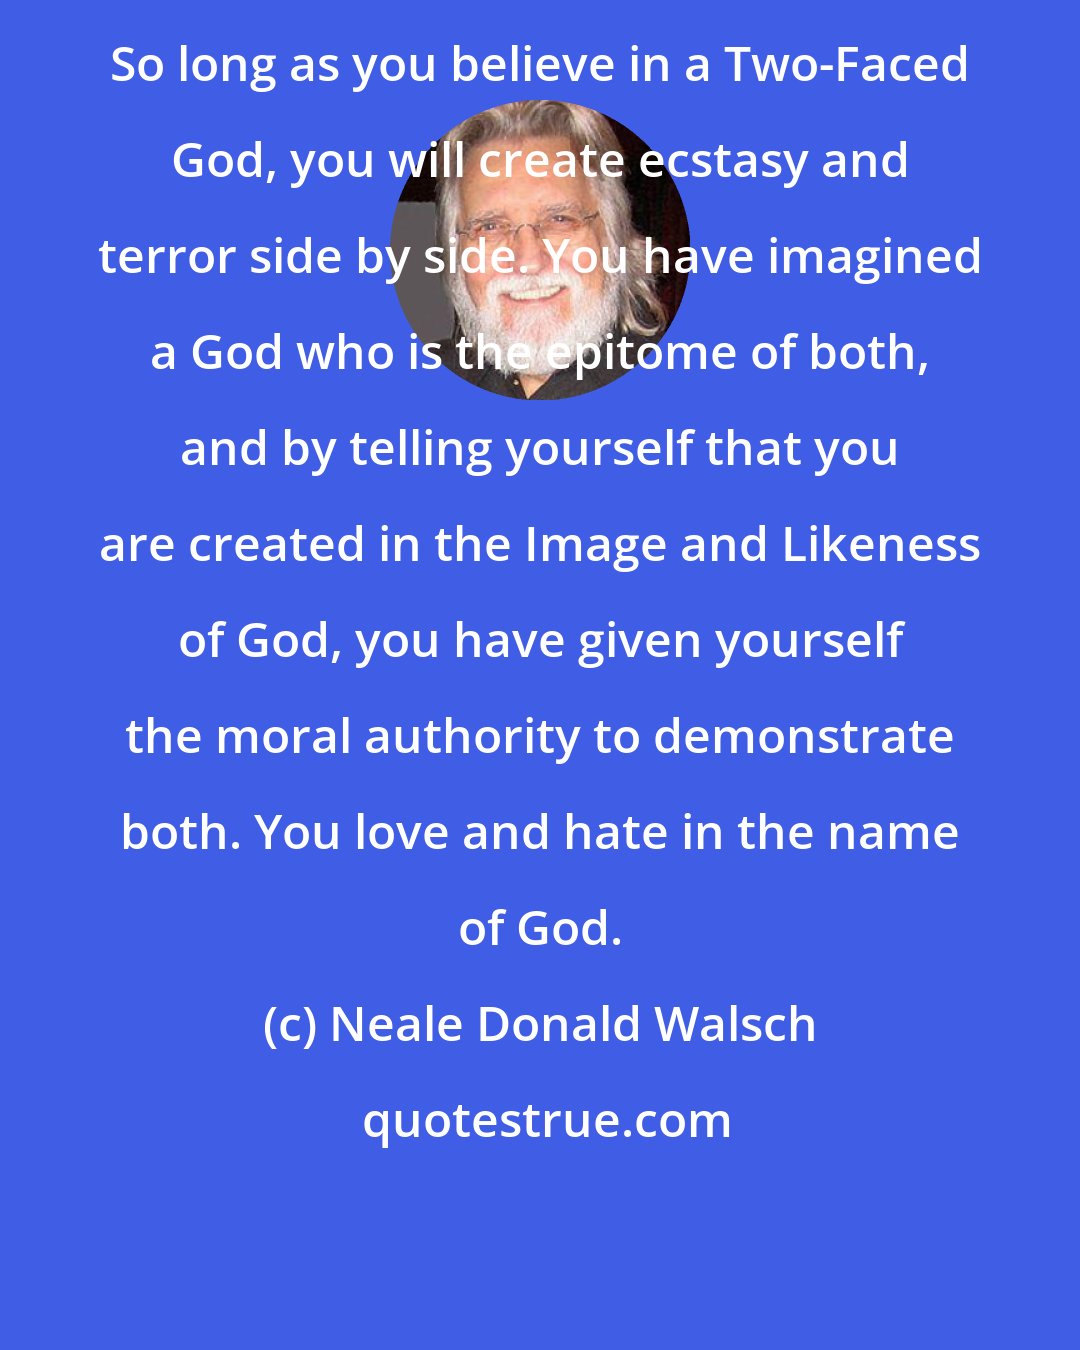 Neale Donald Walsch: So long as you believe in a Two-Faced God, you will create ecstasy and terror side by side. You have imagined a God who is the epitome of both, and by telling yourself that you are created in the Image and Likeness of God, you have given yourself the moral authority to demonstrate both. You love and hate in the name of God.